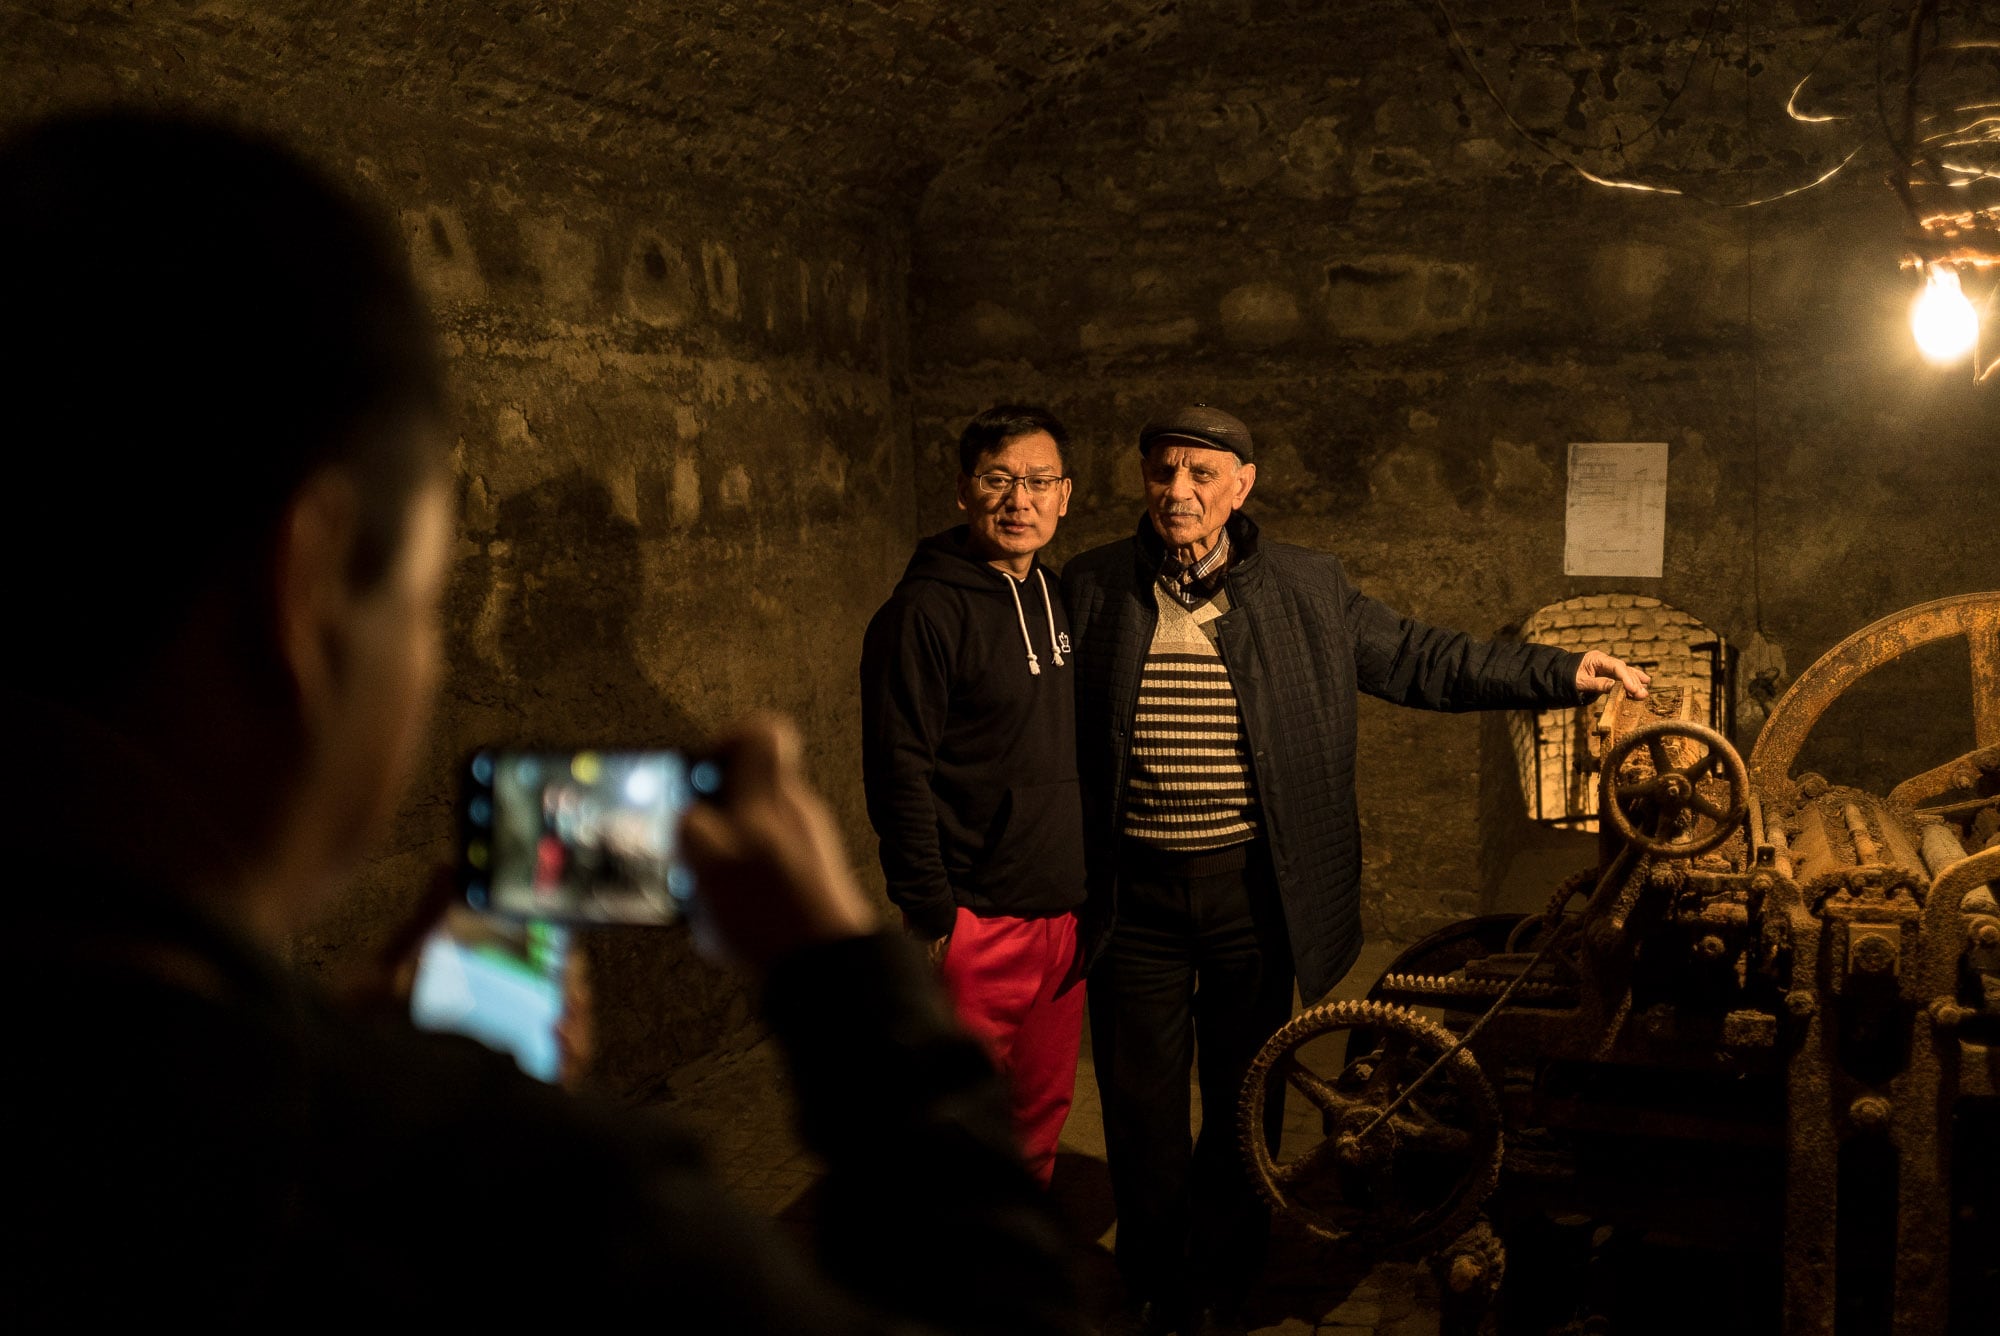 Chinese visitor taking a photo at the Joseph Stalin Underground